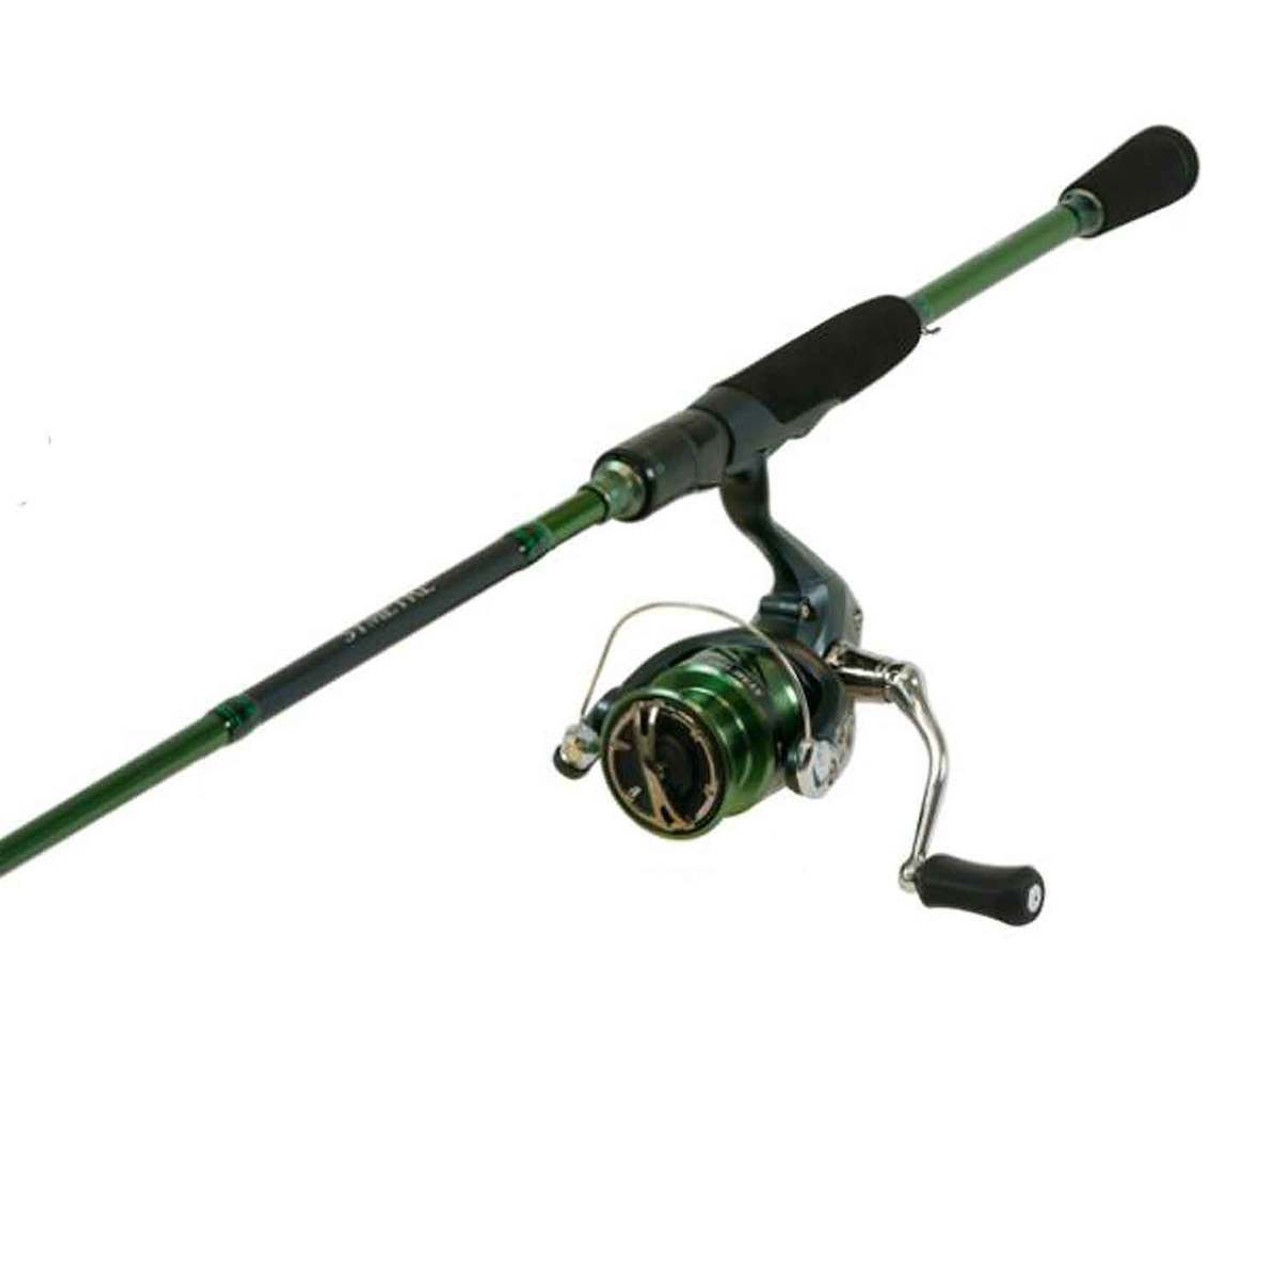 https://cdn11.bigcommerce.com/s-uv5can9due/images/stencil/1280x1280/products/34282/236924/shimano-symetre-spinning-rod-and-reel-__47799.1636652731.jpg?c=2